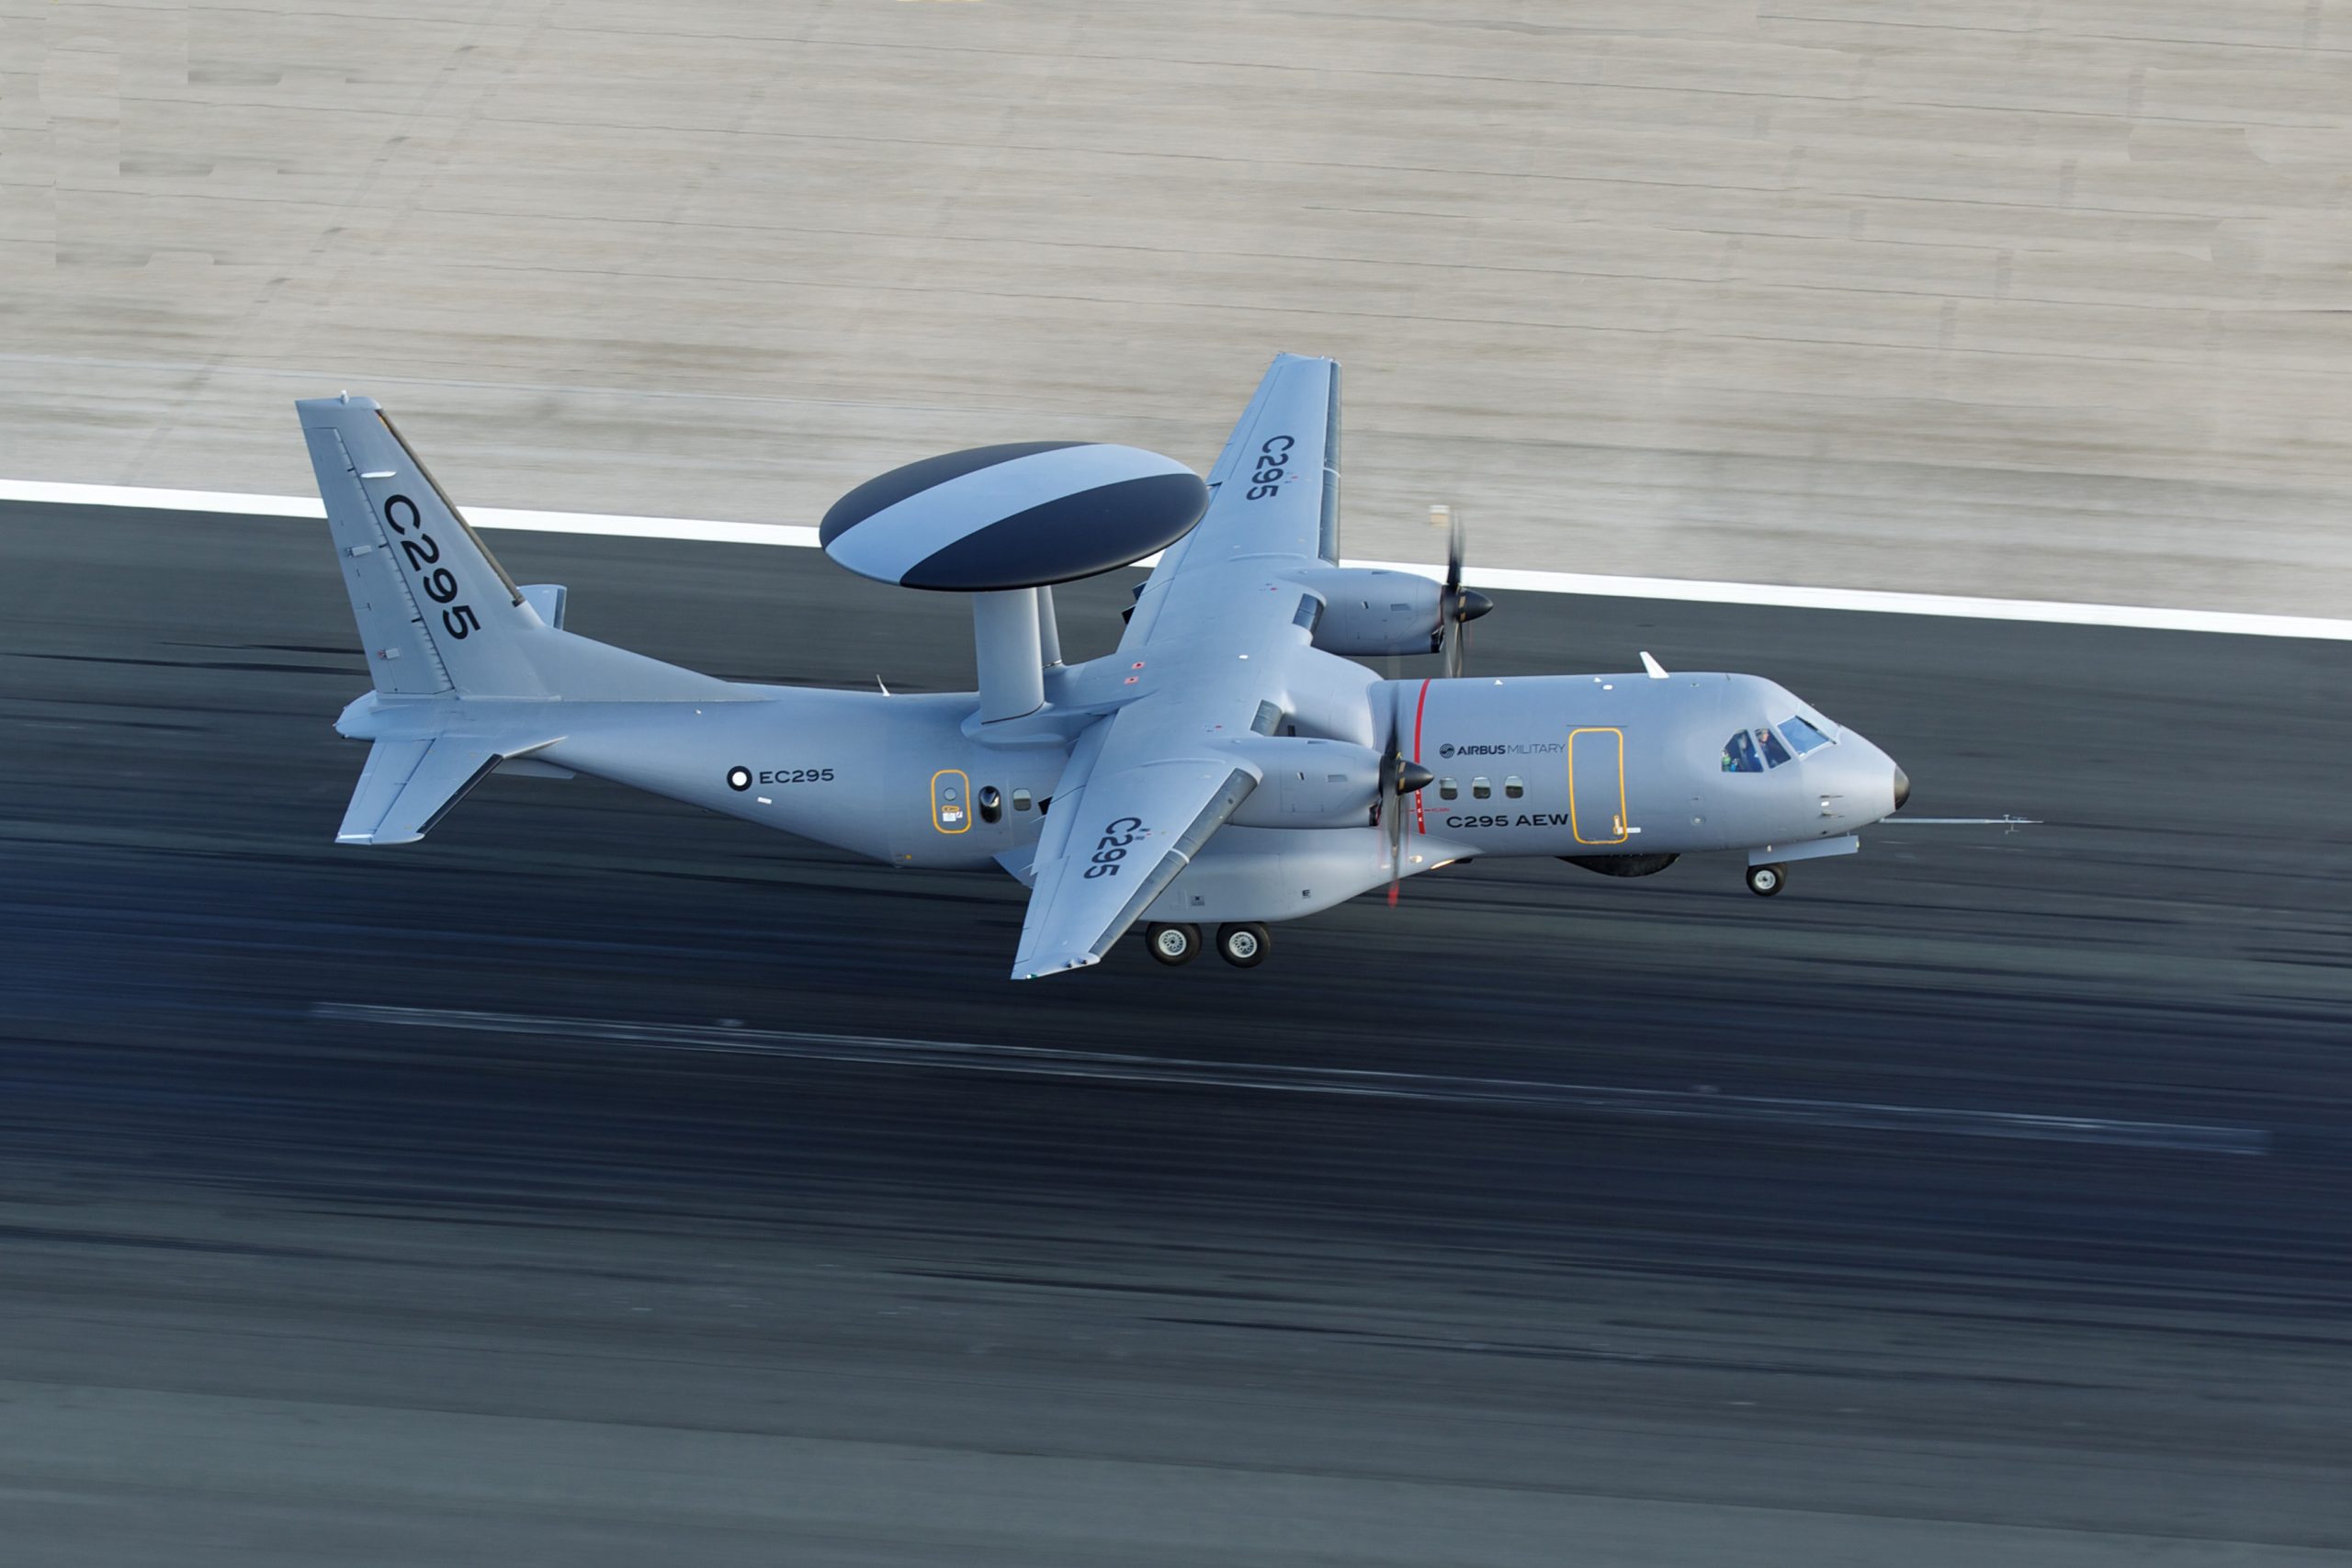 A prototype of the CN-295 AEW&C, a joint-program between Airbus and IAI. Photo credit: Airbus